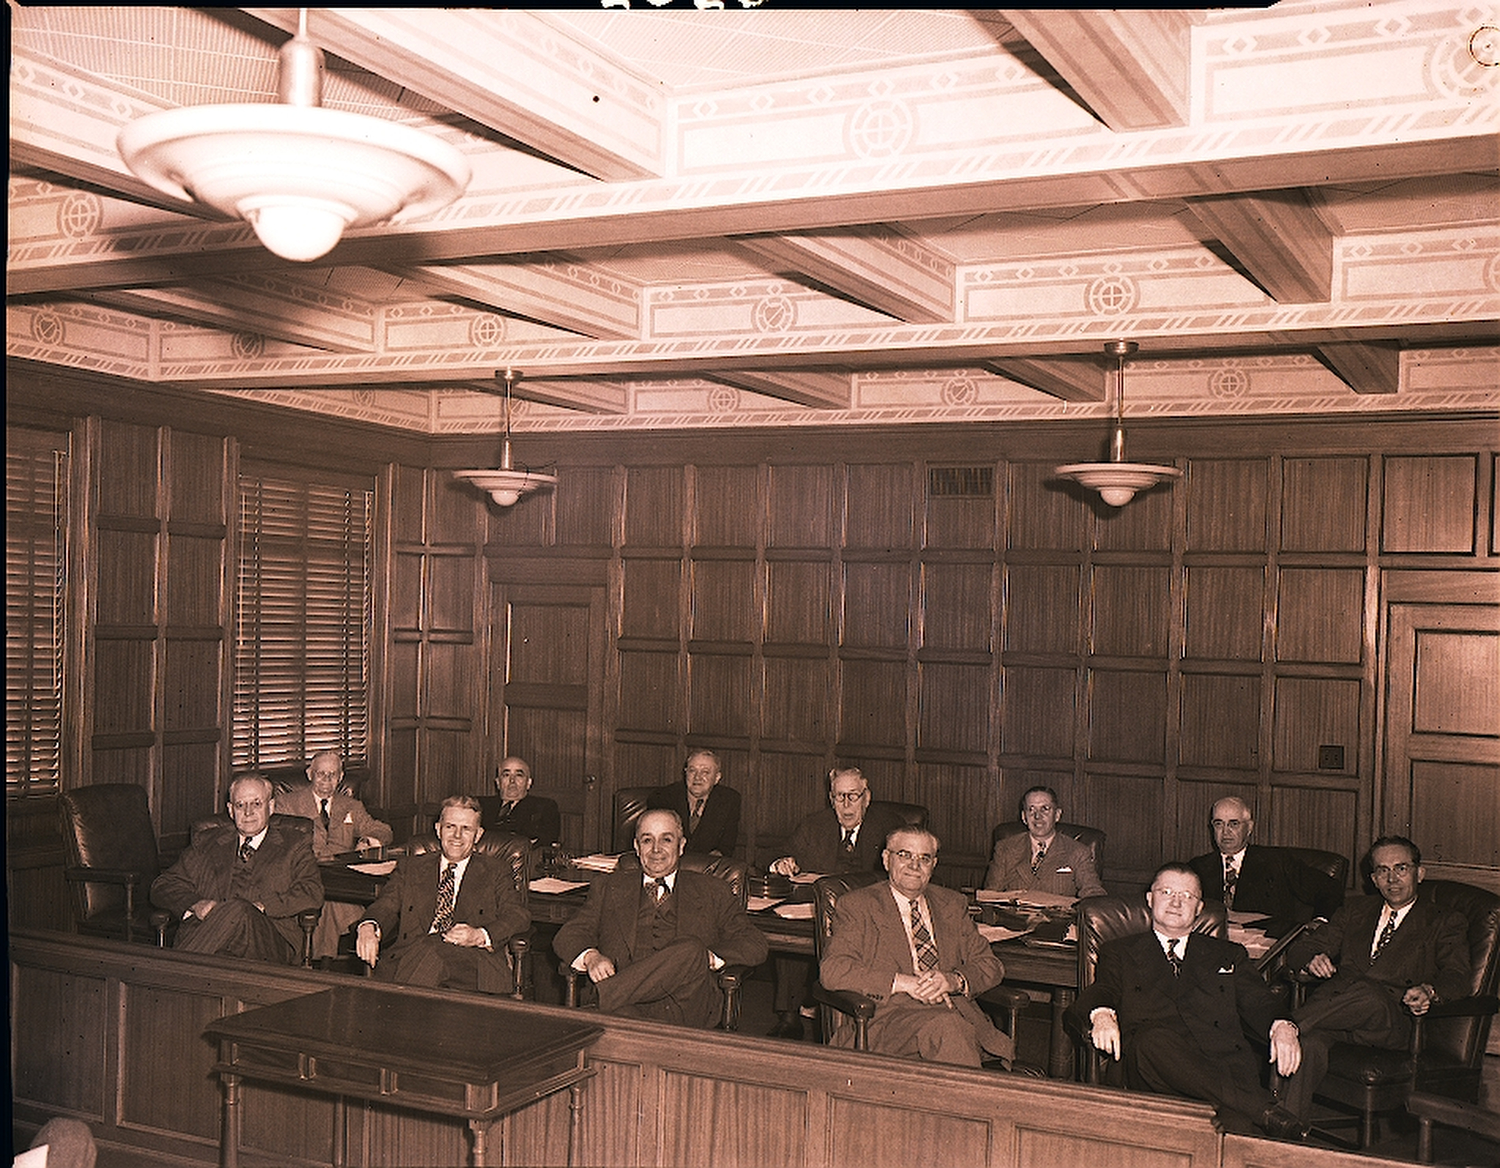 Members of the Harbor Commission and Port staff, 1946.  Front row, from left: unidentified, Robert Shoemaker, chief Port engineer, Eloi "Frenchy" Amar, Port general manager, unidentified, unidentified, and Alvin Maddy, executive secretary. Back row, from left, are Commissioners Gen. James J. Meade, unidentified, Frank J. Parr, W.R. "Frosty" Martin, John L. Kelly and George Rochester.